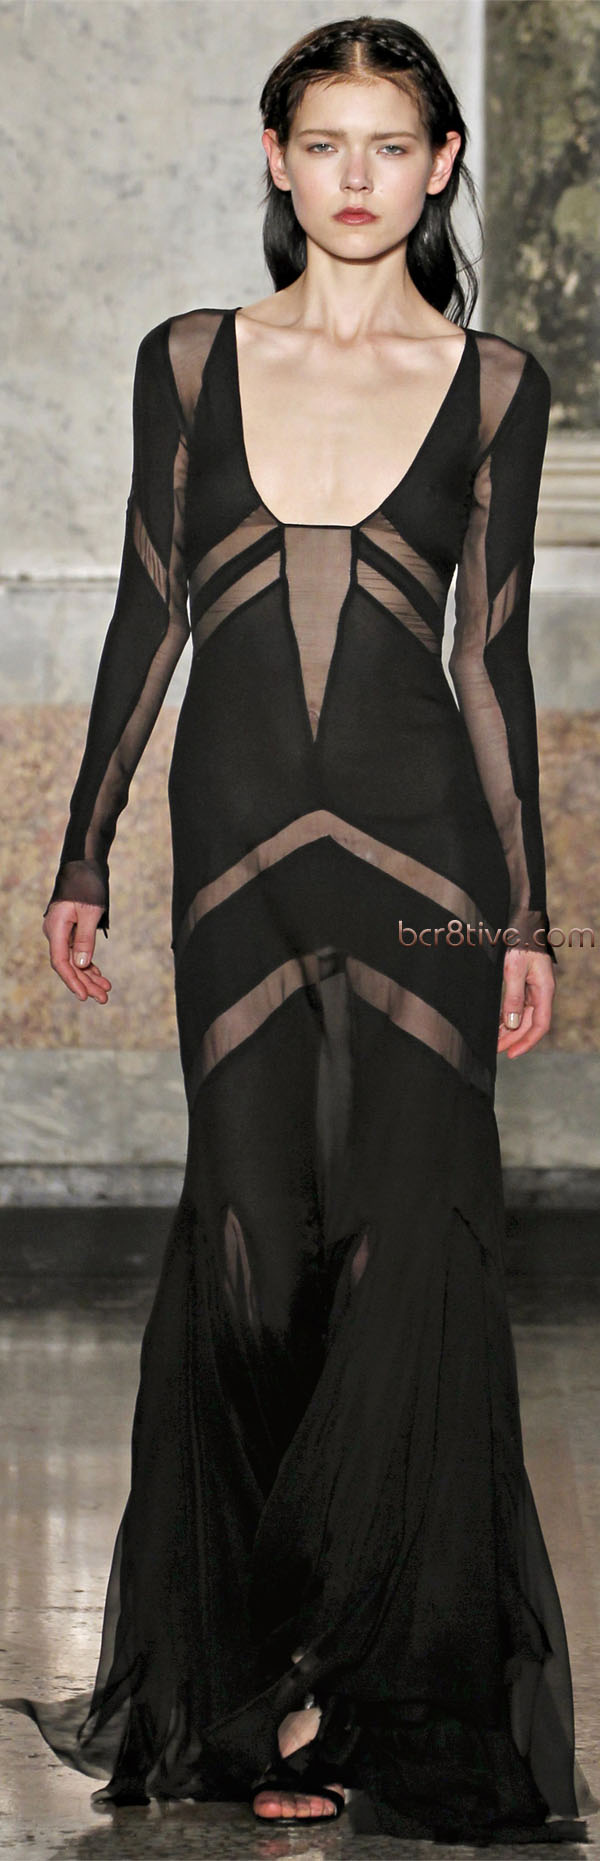 Emilio Pucci Fall Winter 2012 - 2013 Ready to Wear Collection